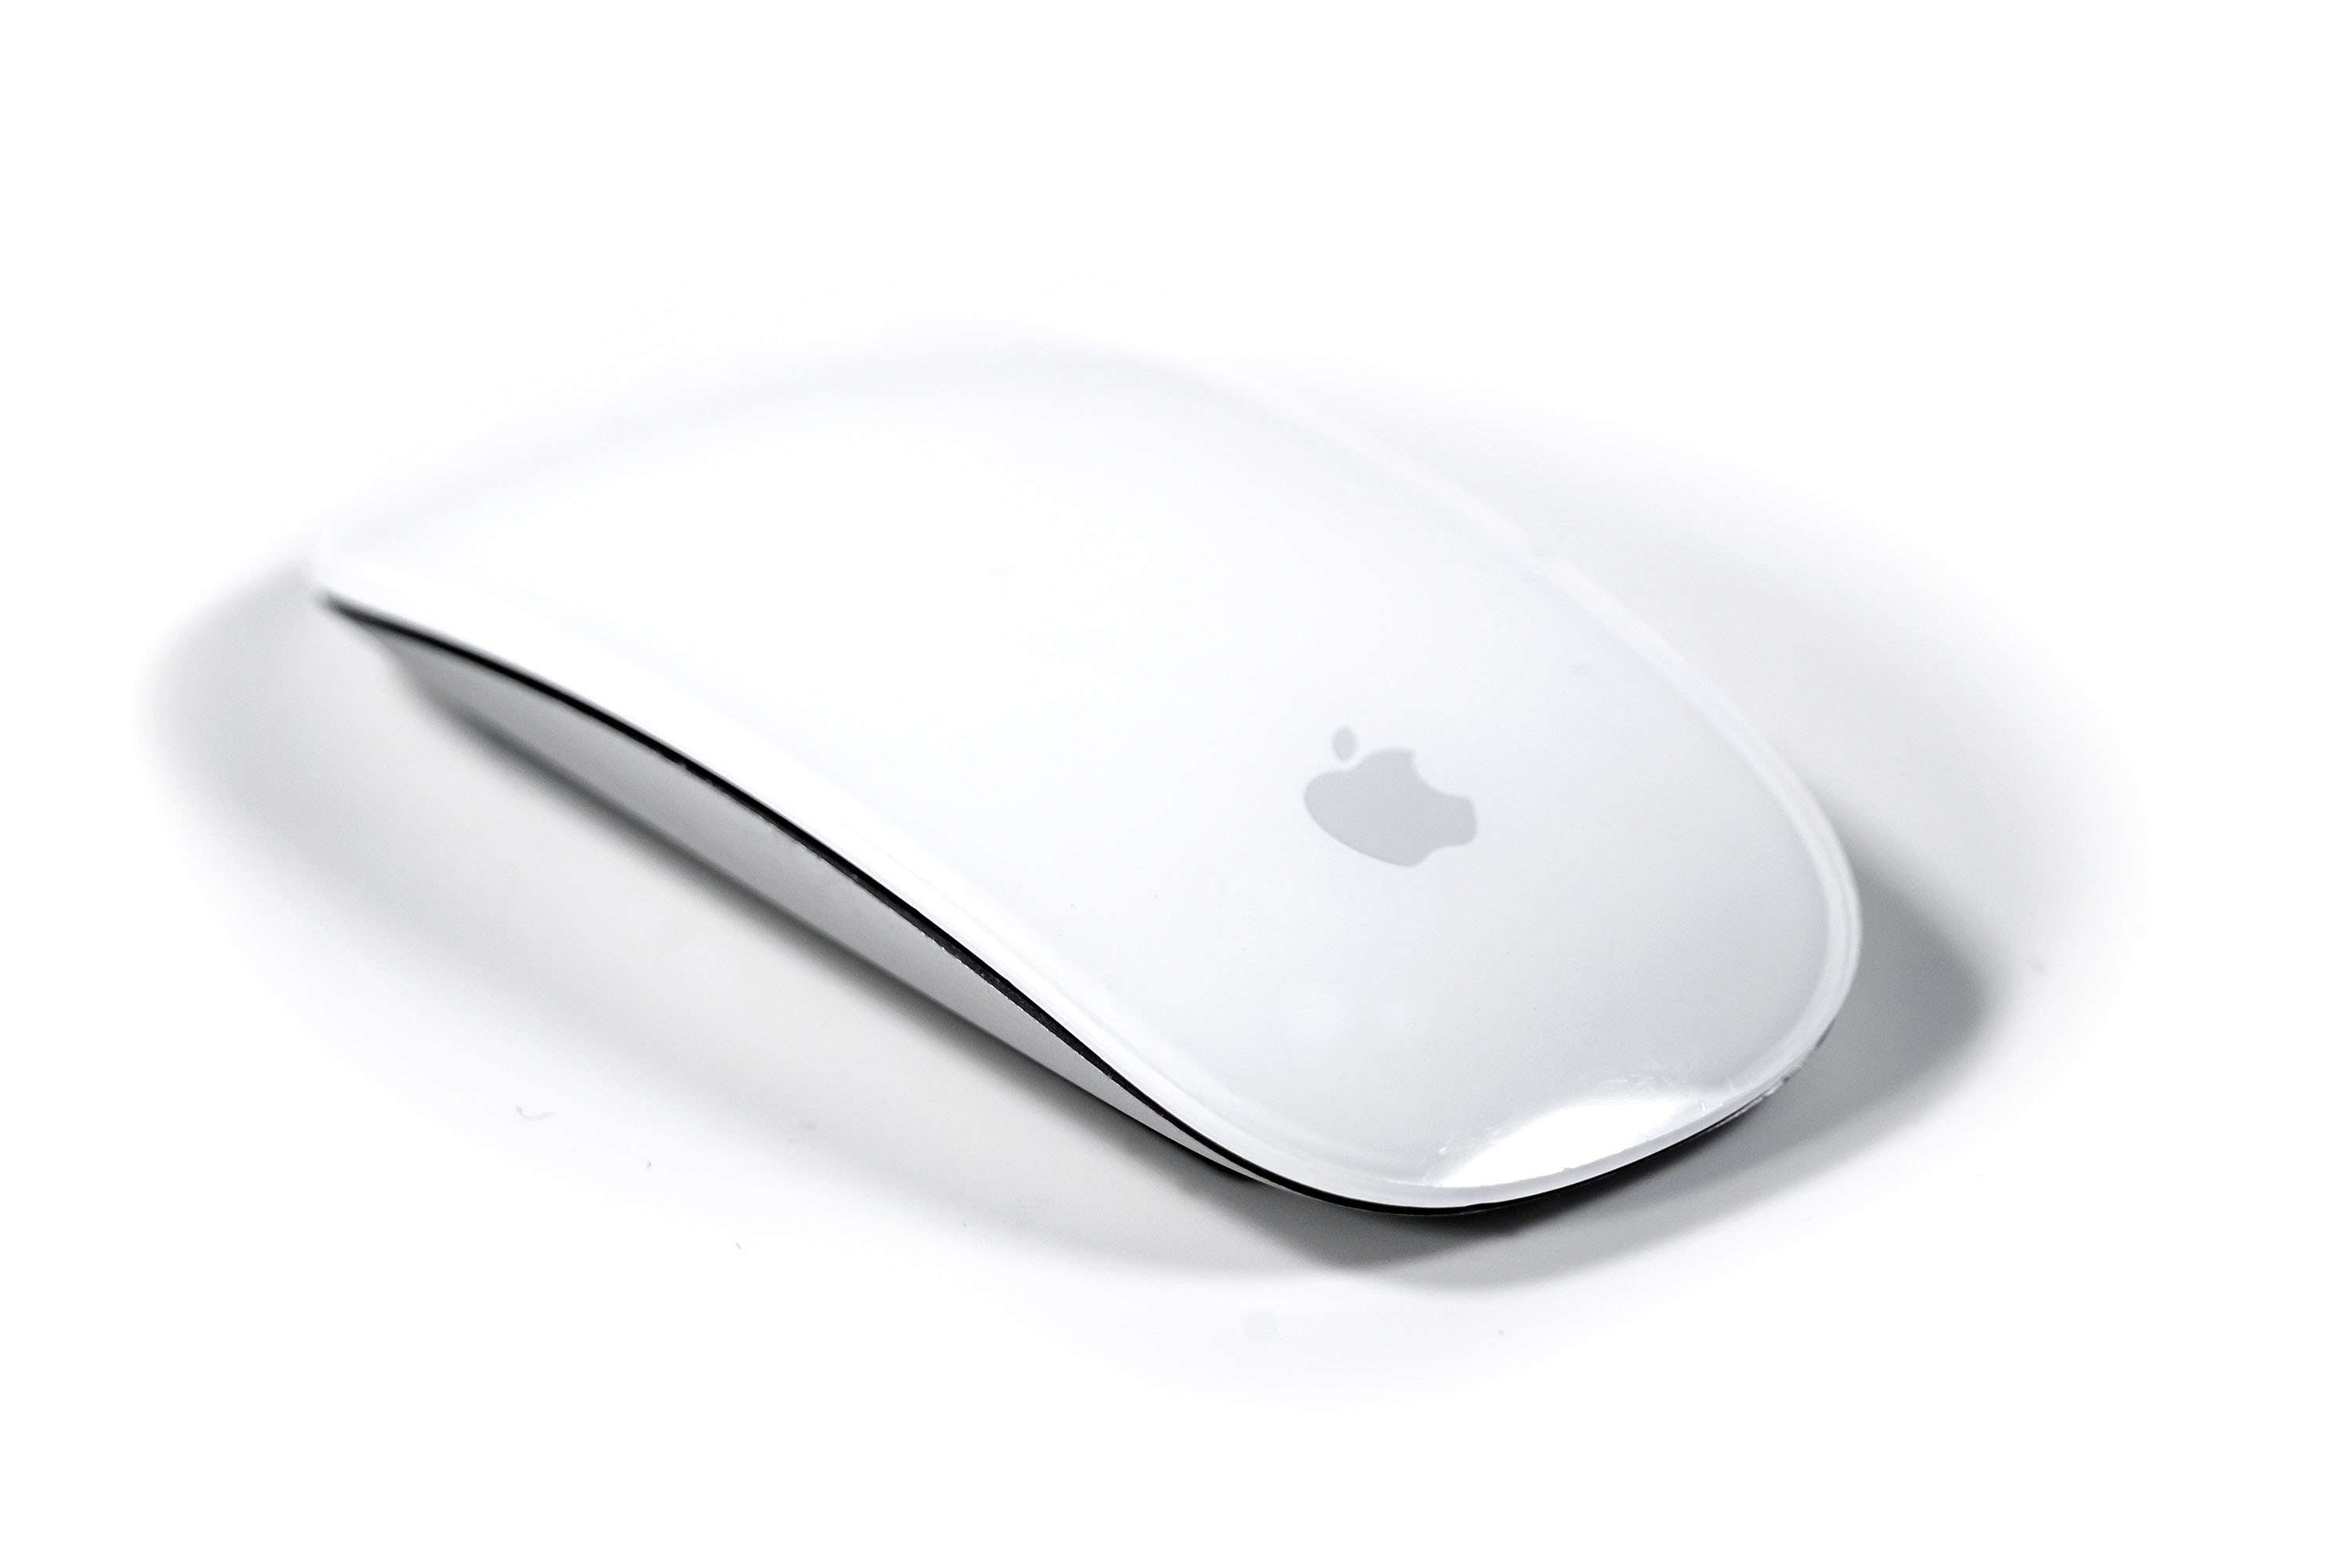 Buy Used & Refurbished Apple Magic Mouse Bluetooth Wireless A1296 MB829AM/A  - Apple Accessories